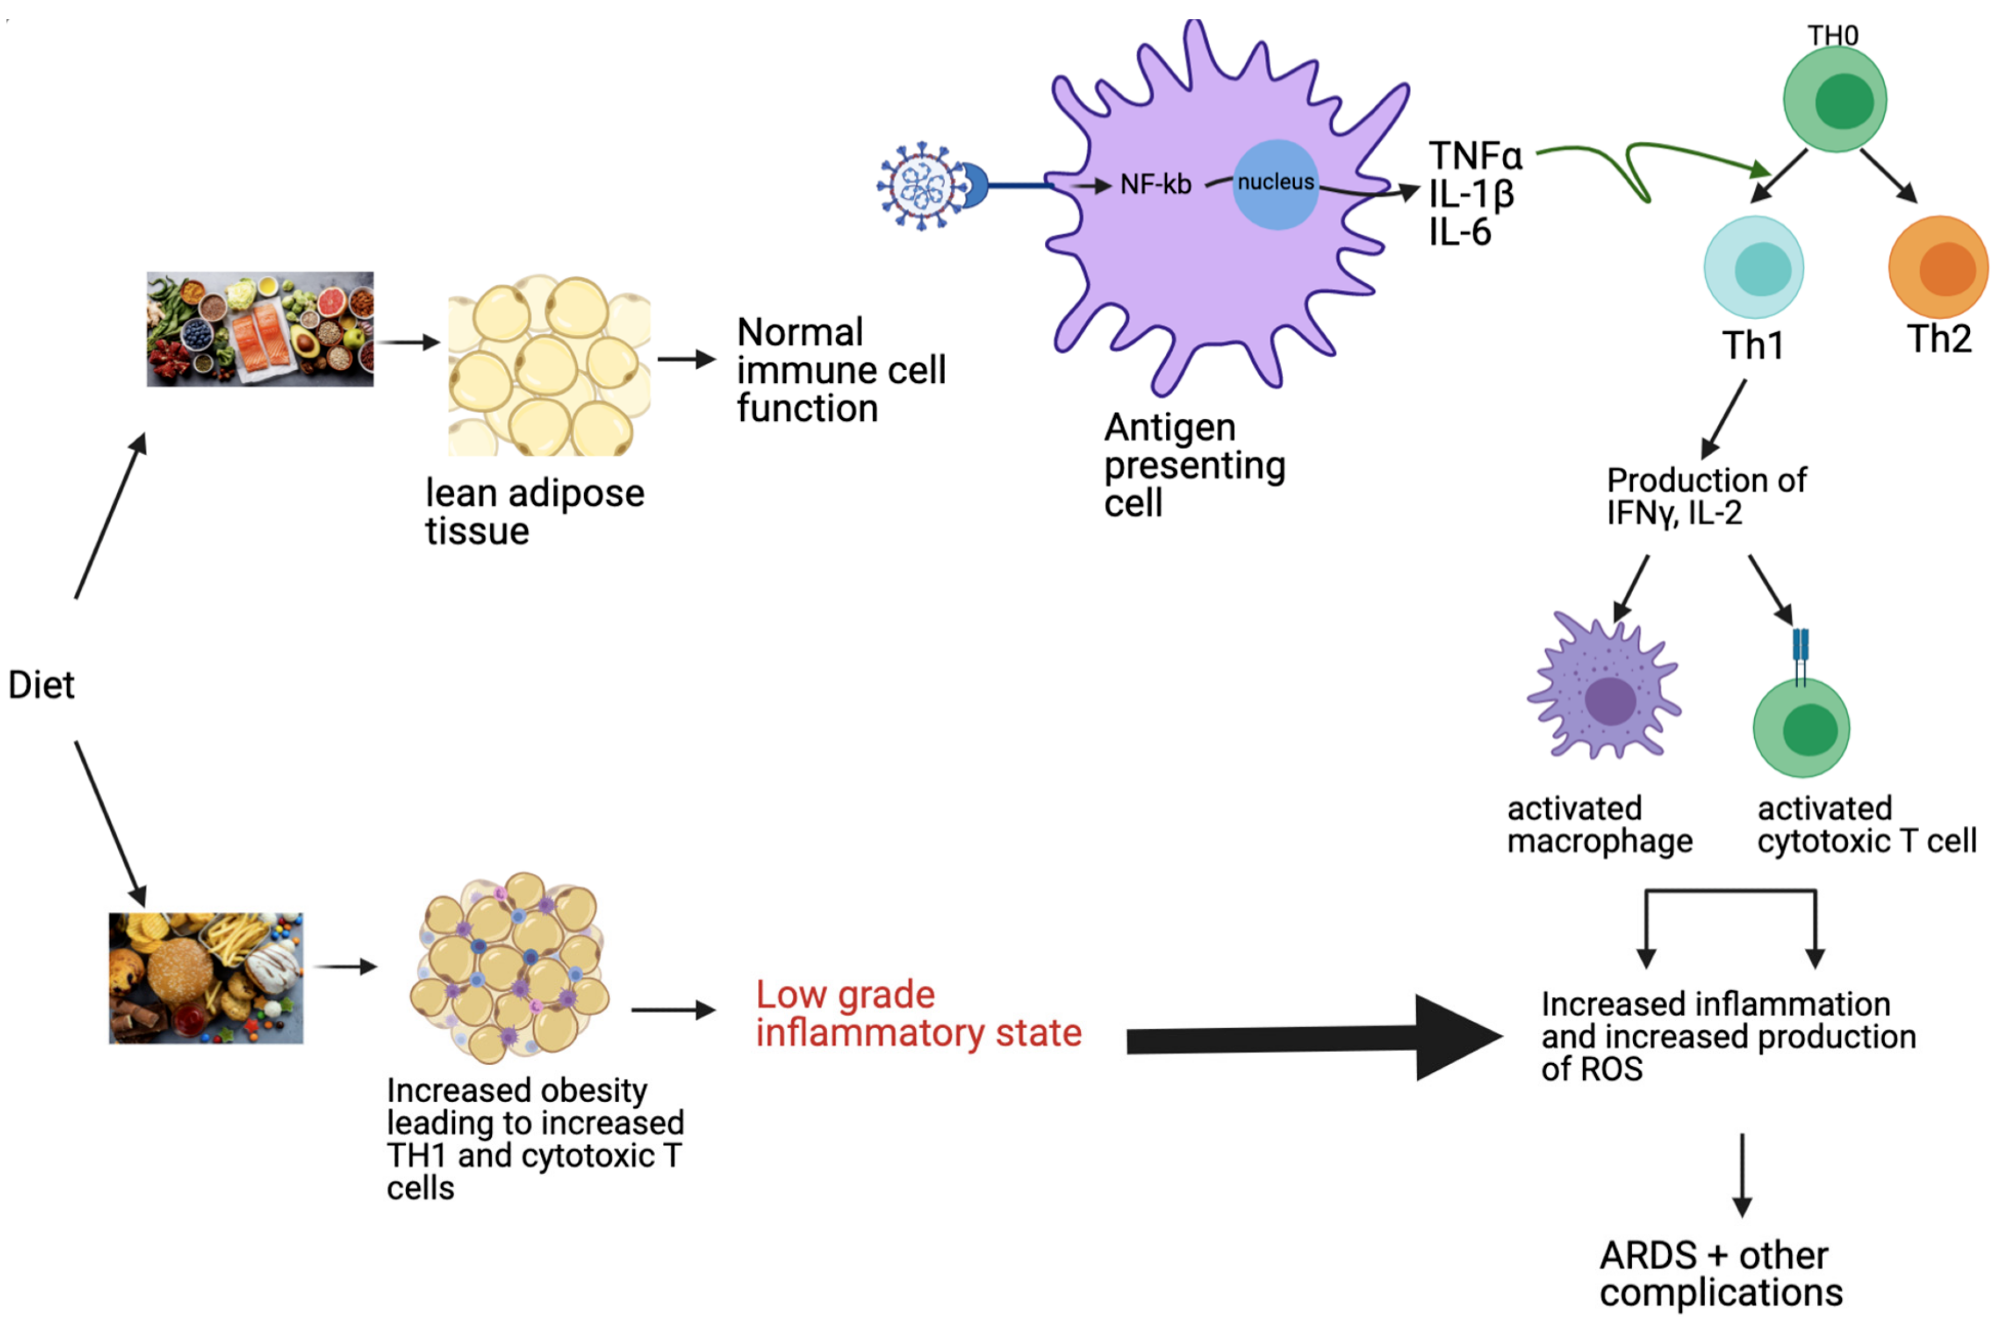 Proposed modulation of the immune pathway by diet. The Western diet, consisting of high fat, refined sugar, and saturated carbohydrates, leads to increased obesity, as well as an increase in TH1 and cytotoxic T cells, resulting in a low-grade inflammatory state. This inflammatory pathway is exacerbated in COVID-19 through the virus’s ability to increase pro-inflammatory cytokines, resulting in ARDS and other morbid complications. In contrast, the Mediterranean diet, consisting of fruits, vegetables, nuts, and fish maintains lean adipose tissue, contributing to a balanced immune system and absent or improved inflammatory state. Nuclear factor-kappa B (NF-kb), tumor necrosis factor-alpha (TNF-α), interleukin-1 beta (IL-1β); interleukin-6 (IL-6); interferon-gamma (IFNγ); interleukin-2 (IL-2); reactive oxygen species (ROS); acute respiratory distress syndrome (ARDS).